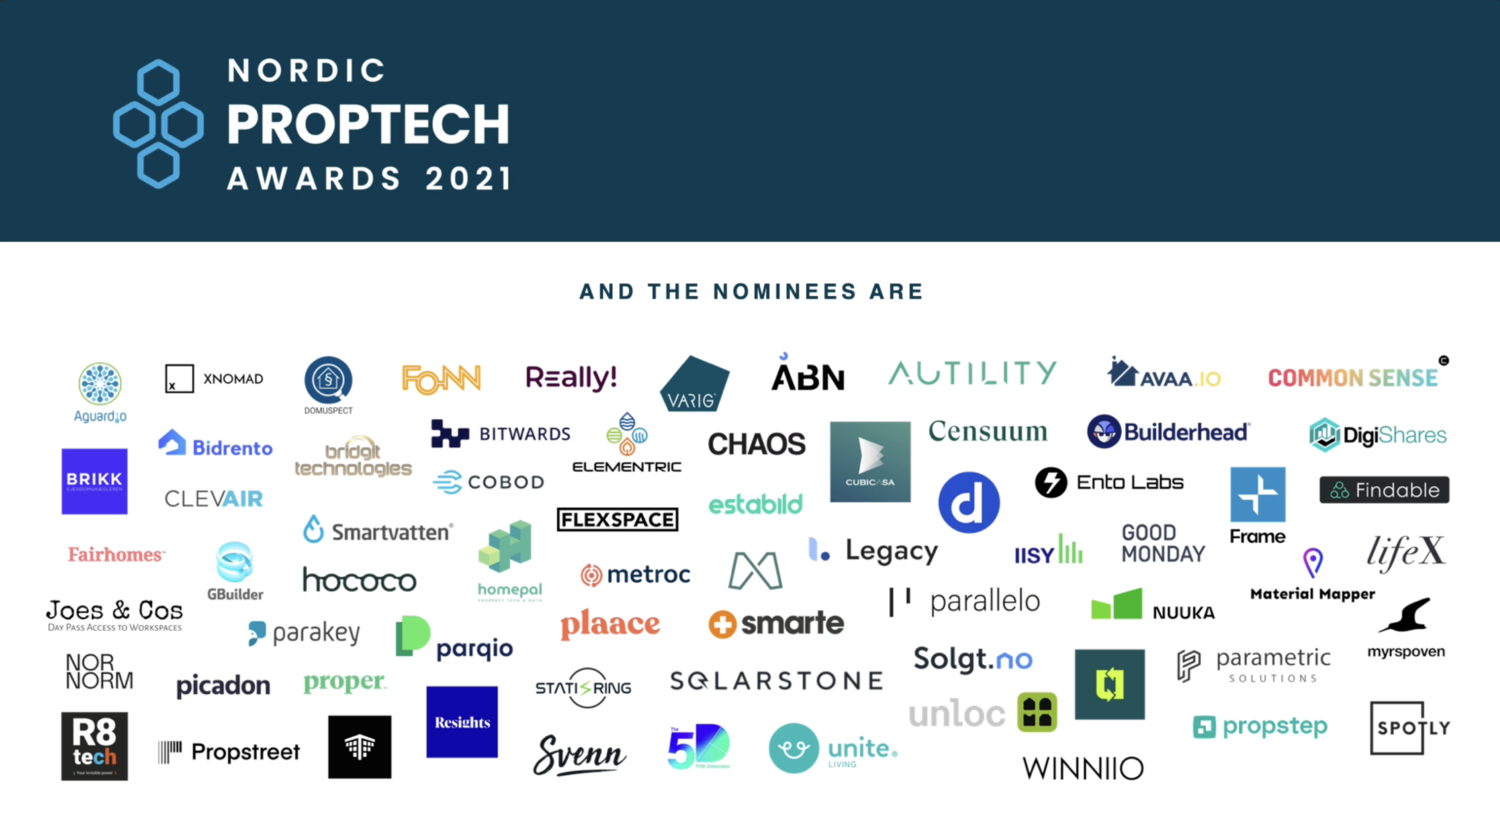 Bridgit Tech have been nominated for Nordic PropTech Awards 2021!